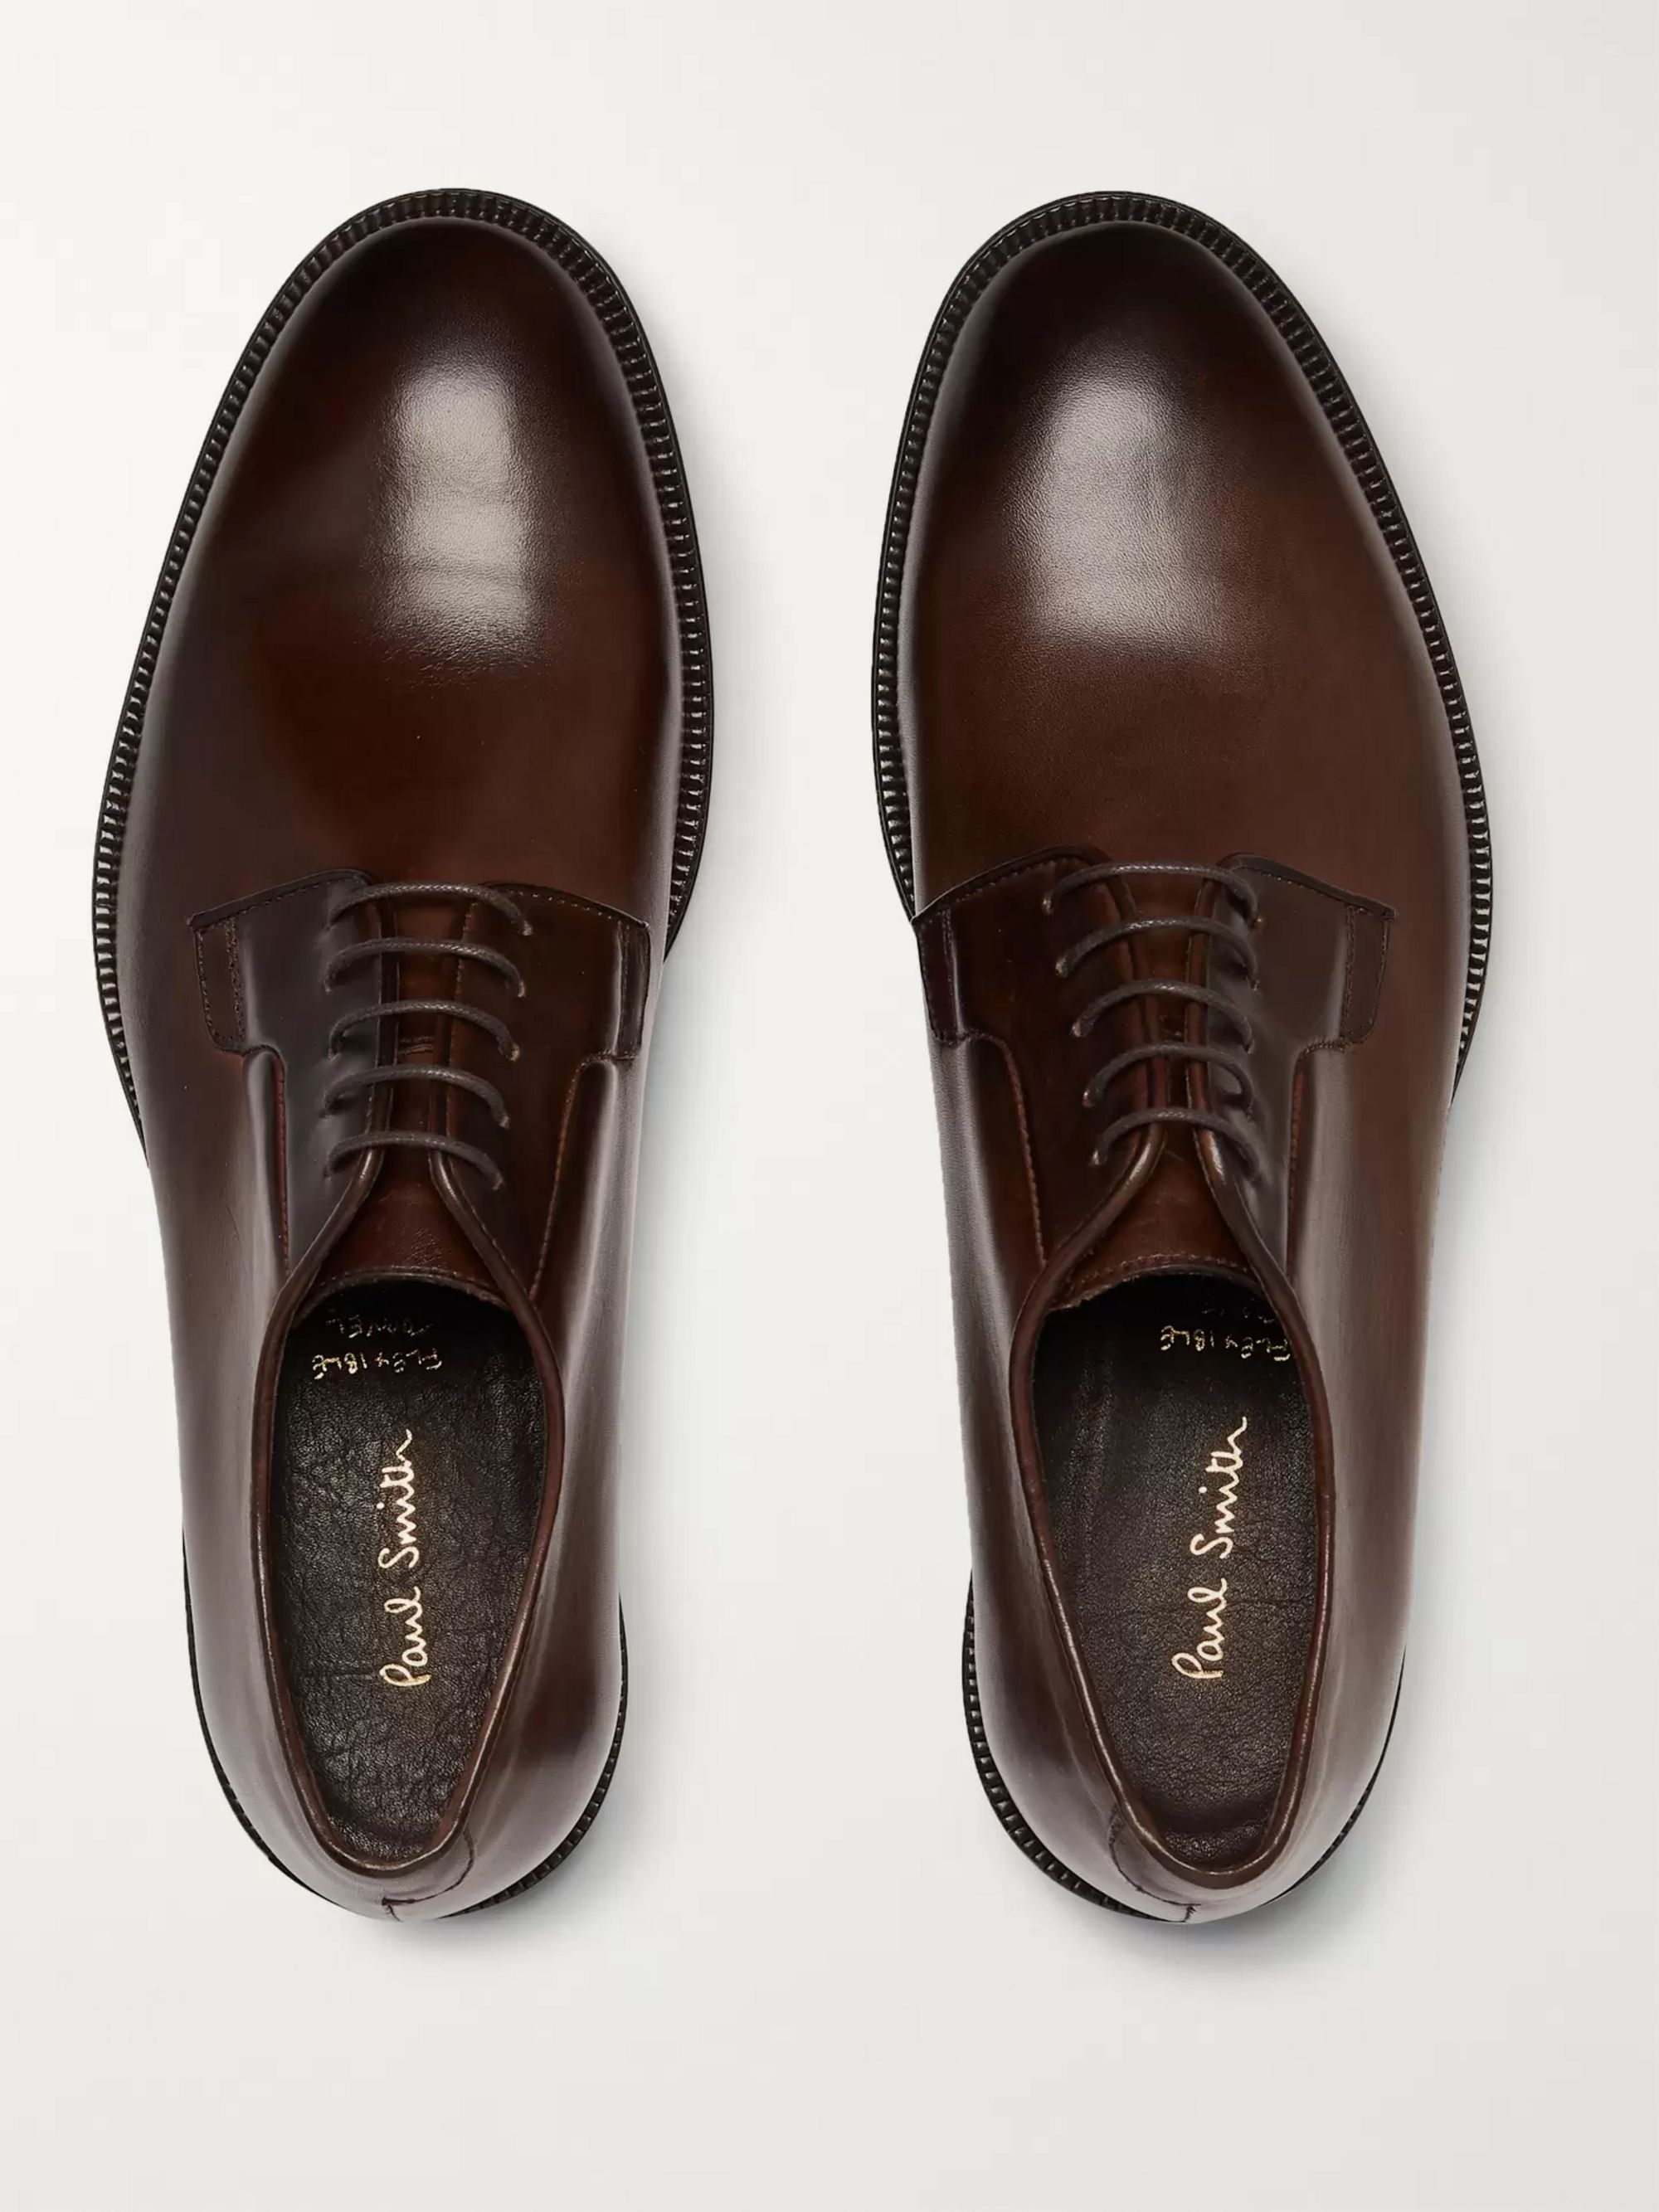 paul smith chester shoes